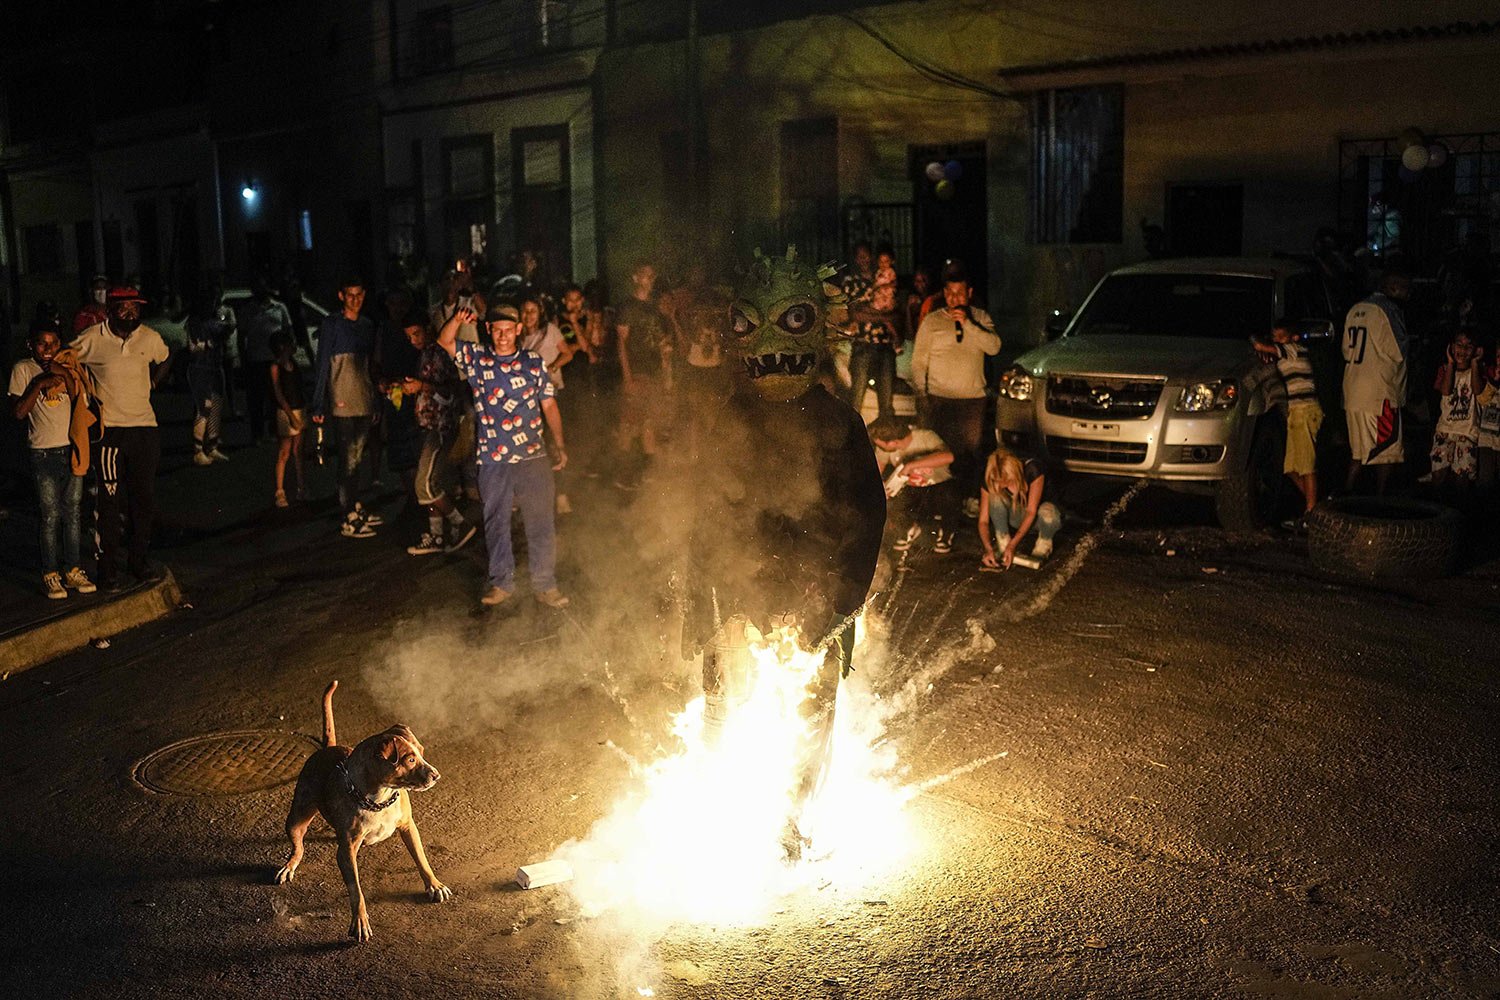  An effigy representing Judas Iscariot and COVID-19 burns as a dog tries to bite it in the San Agustin neighborhood of Caracas, Venezuela, April 17, 2022. The burning of Judas is an Easter-time ritual where an effigy of Judas Iscariot is hanged on Go